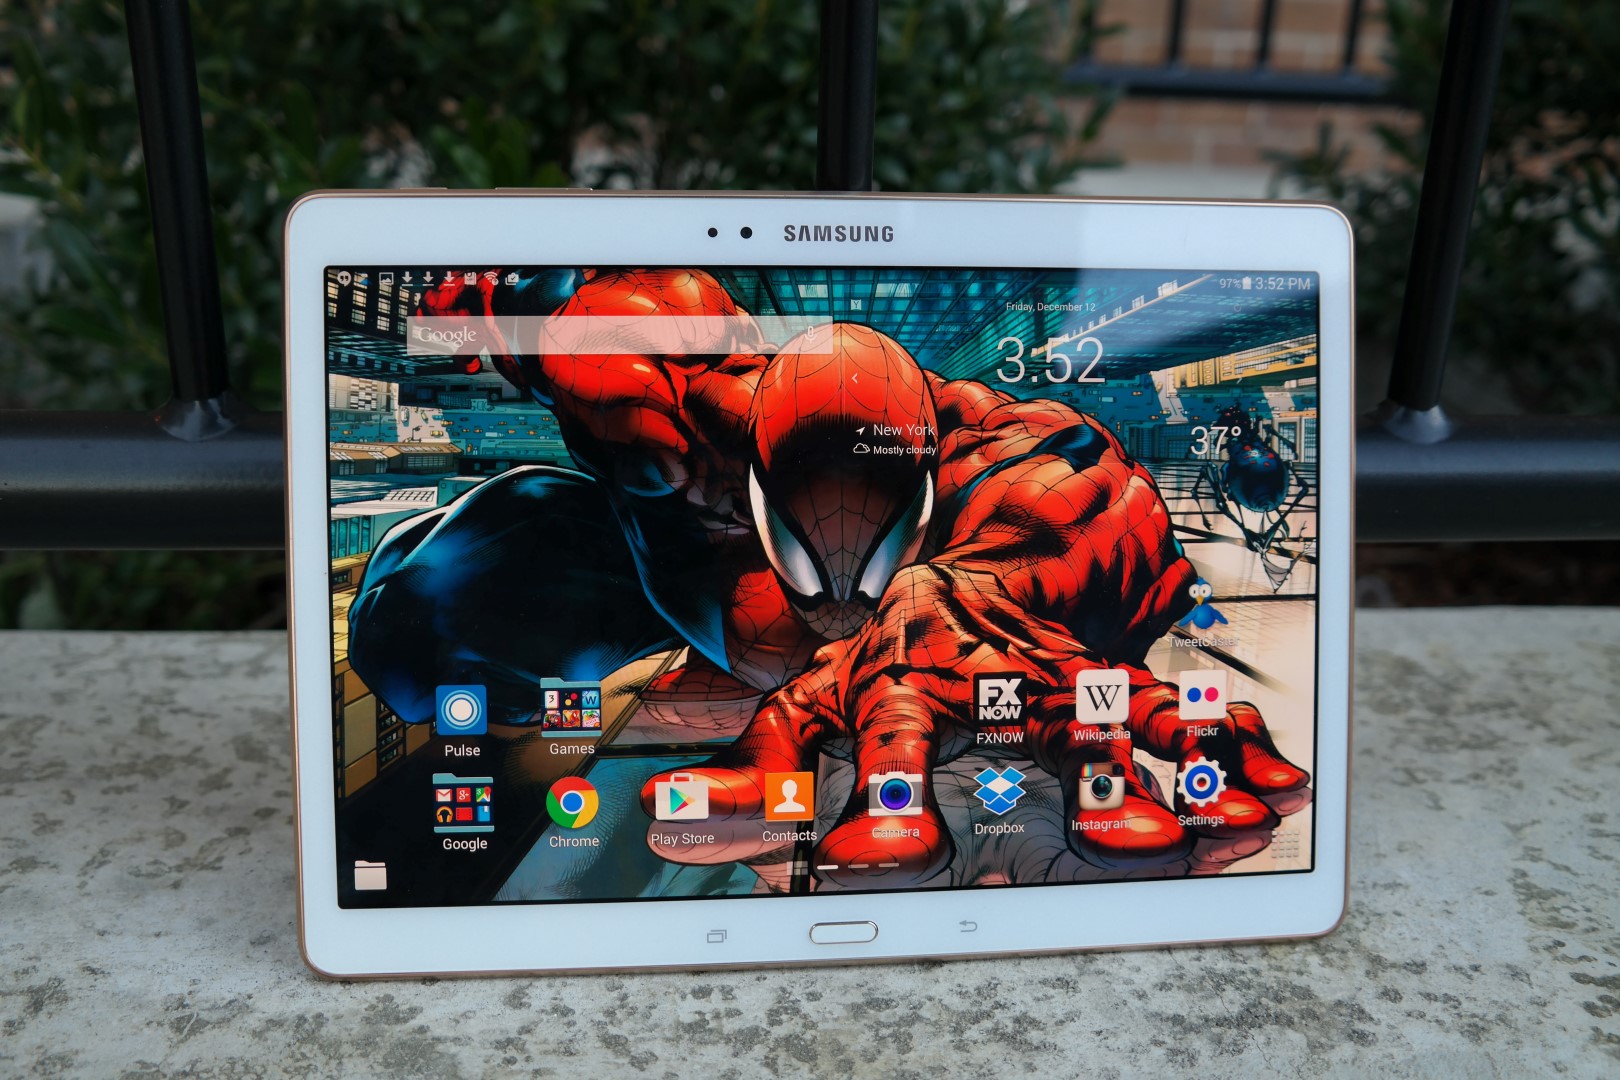 Jumping jack Detector markt Samsung Galaxy Tab S 10.5 [Review] – G Style Magazine